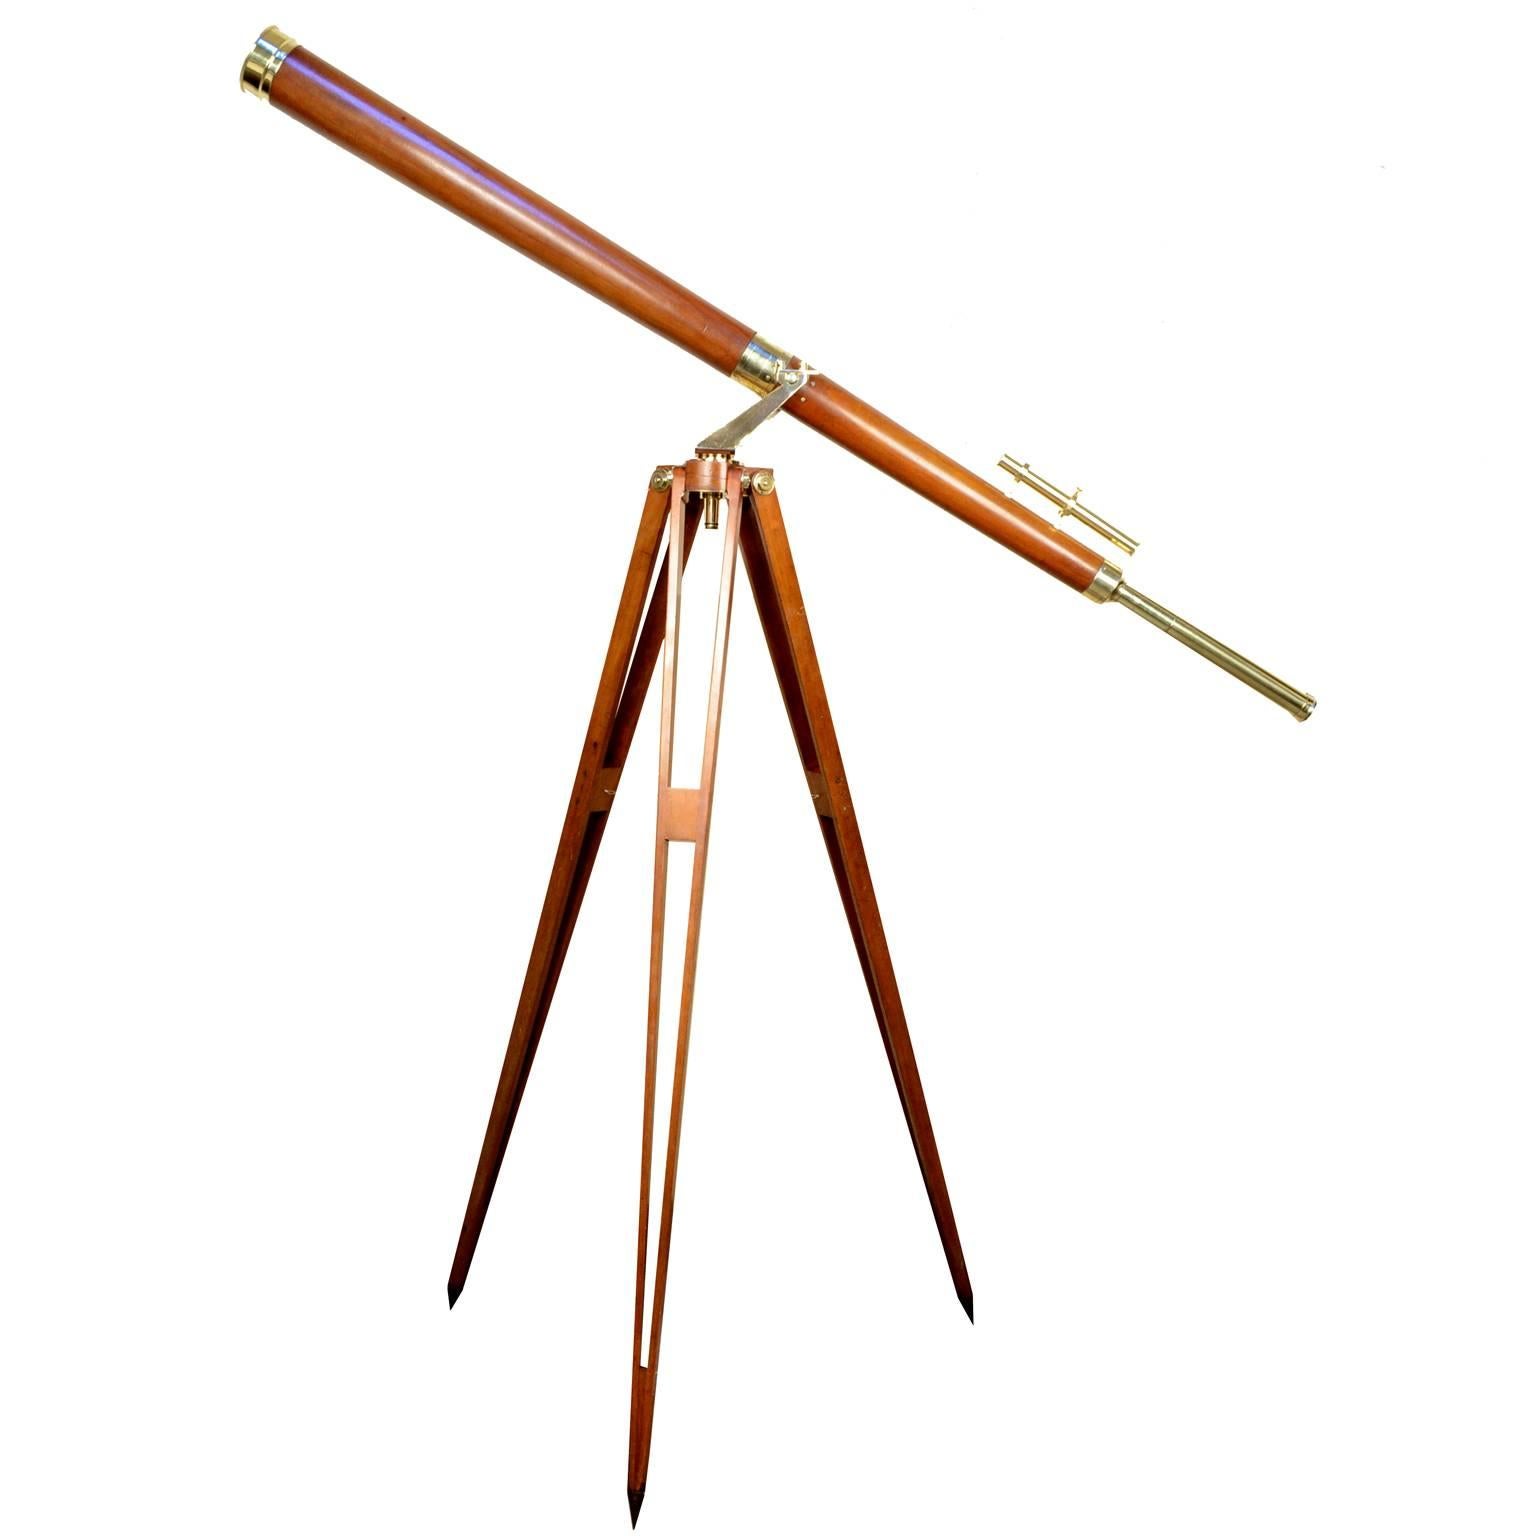 Astronomical telescope, wood and brass, splayed shaped, signed W. Gilbert & Sons London, early 1800. Focusing with one extension and rack. Original oak wooden tripod. Very good condition and in order. Maximum length cm 230 - inches 90.55, minimum